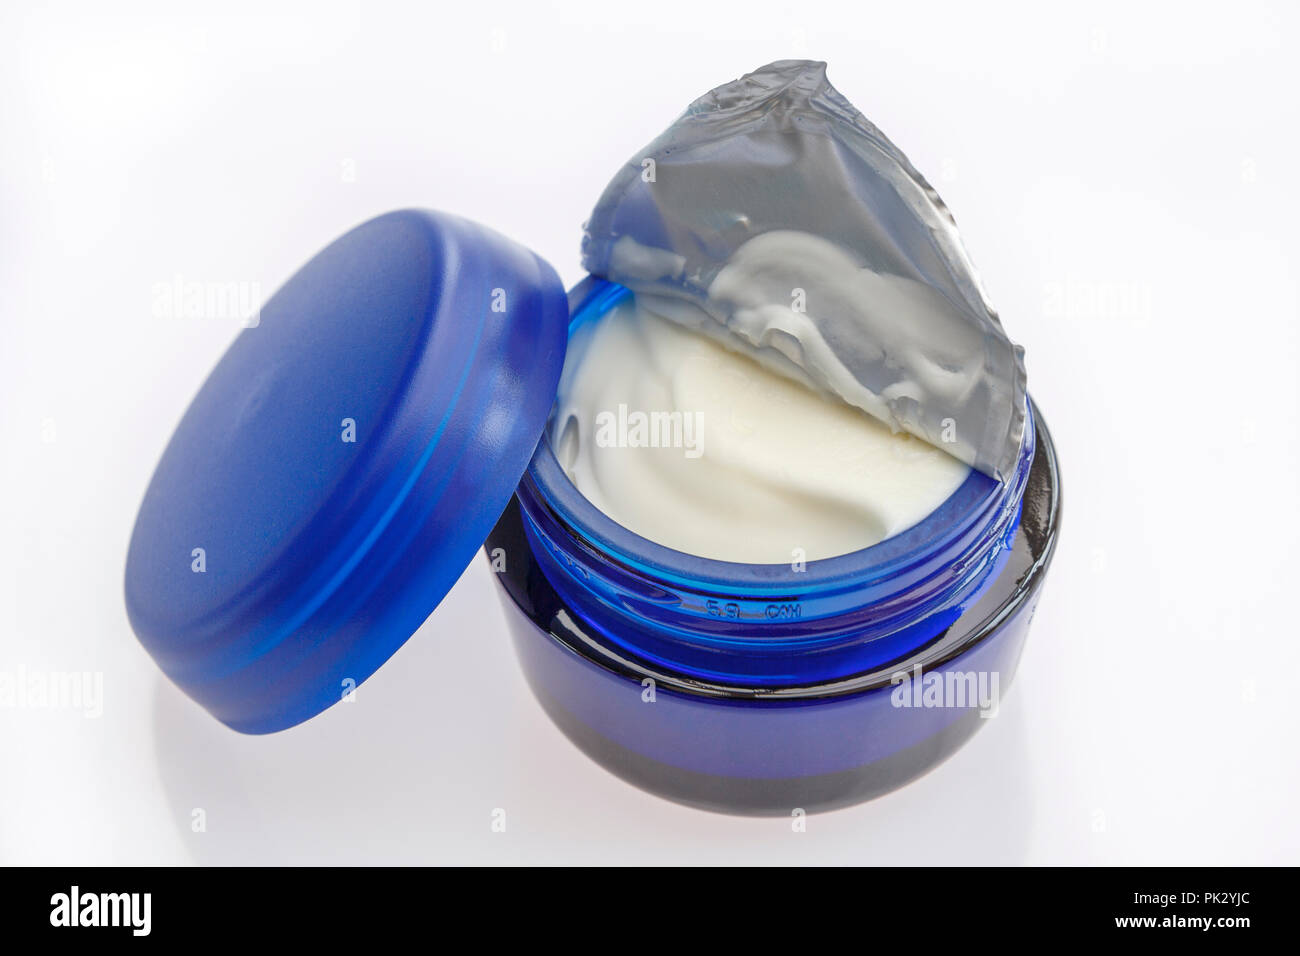 Download New Open Blue Jar Of Moisturising Face Cream Isolated On A Plain White Background Stock Photo Alamy Yellowimages Mockups